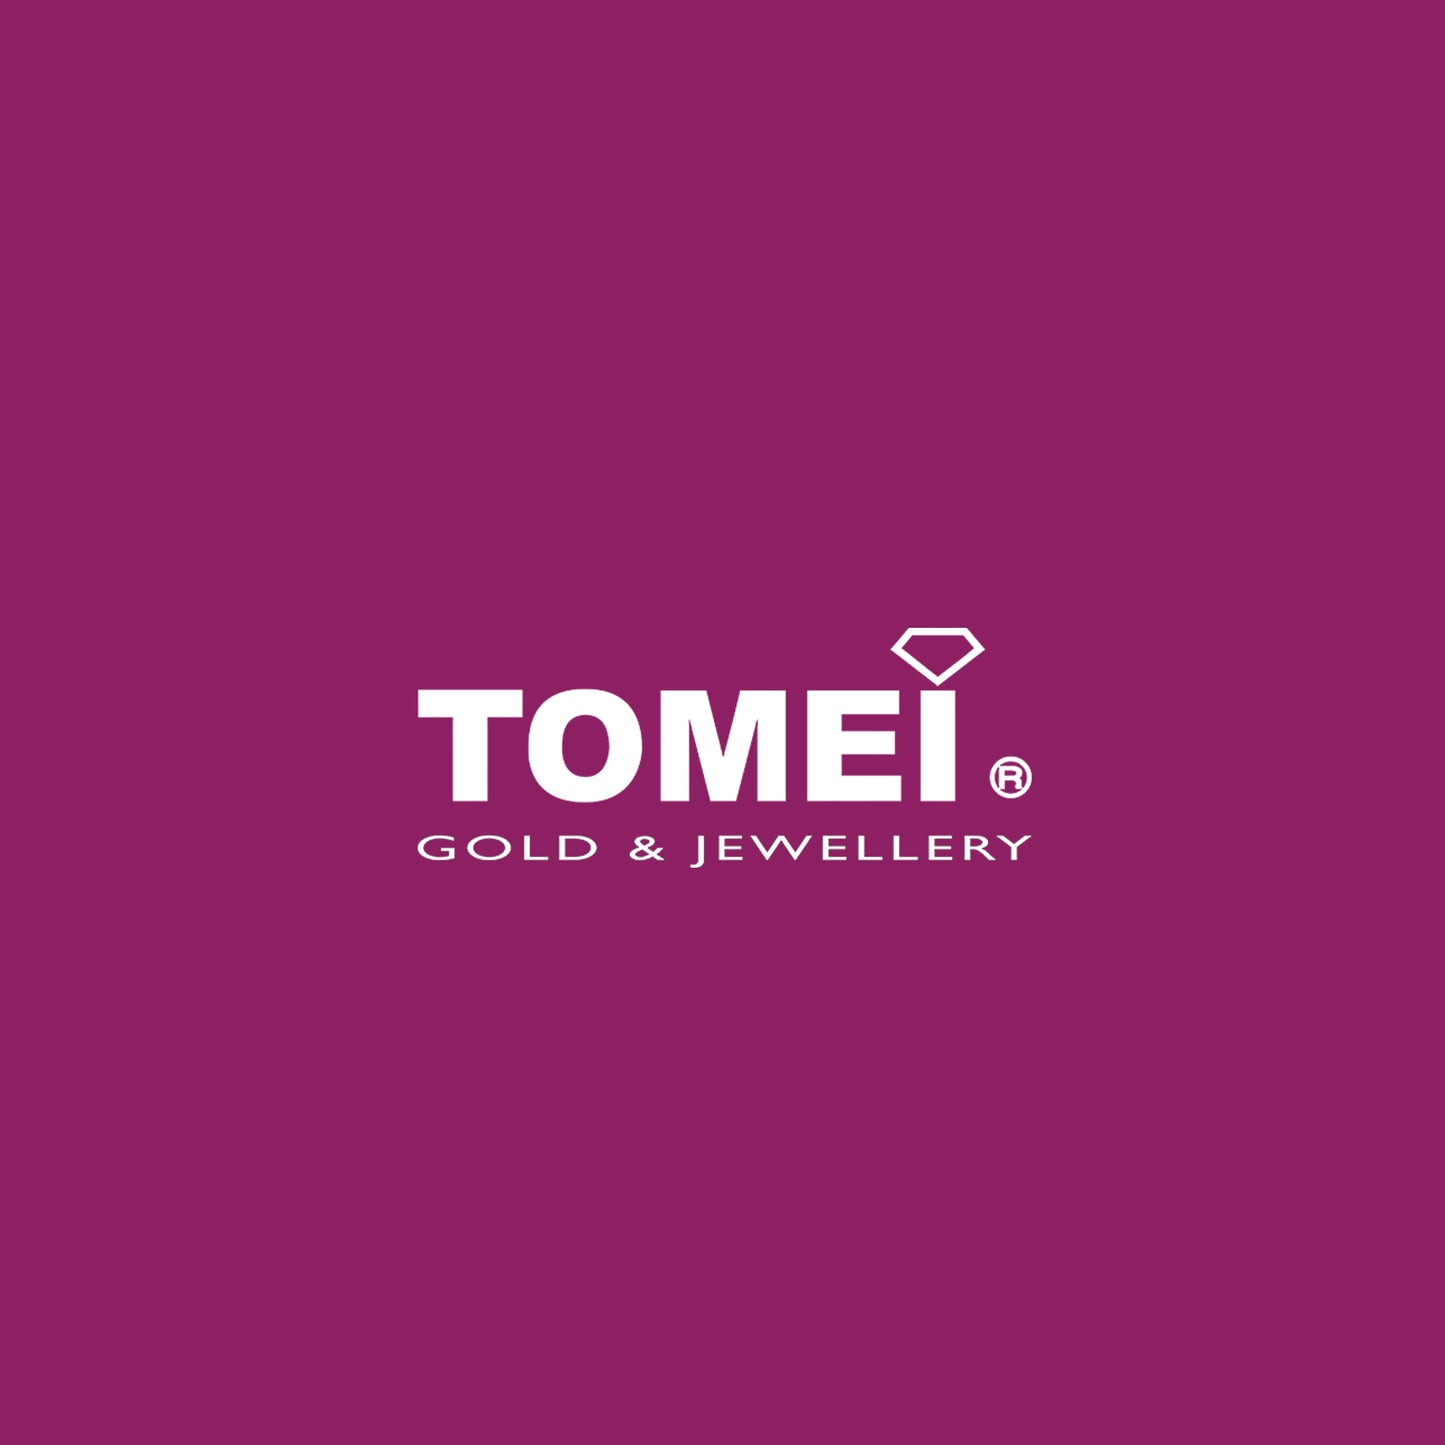 TOMEI Ring, White Gold 750 (AB6857)